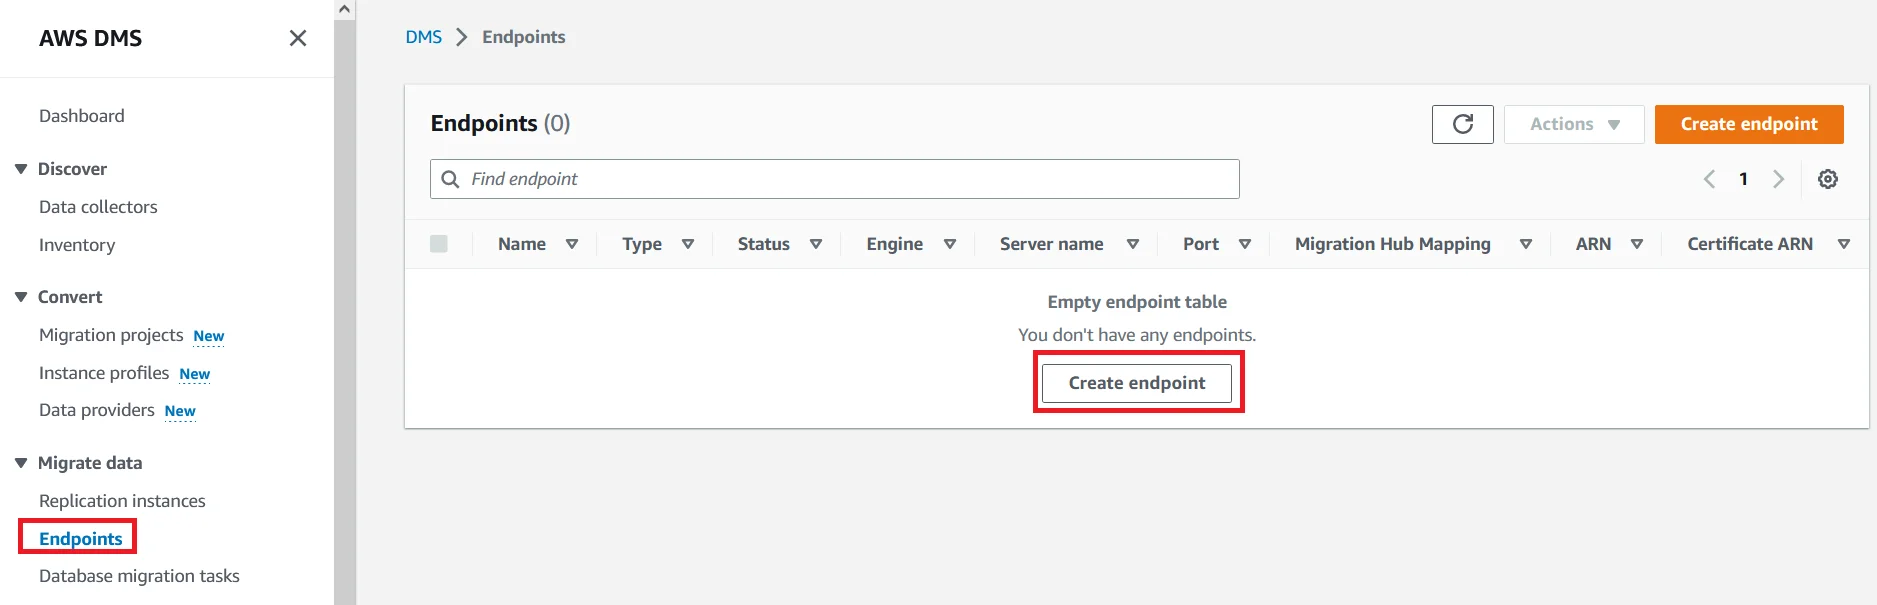 Upgrade Aurora PostgreSQL latest version with 0 Downtime using DMS Create Endpoints